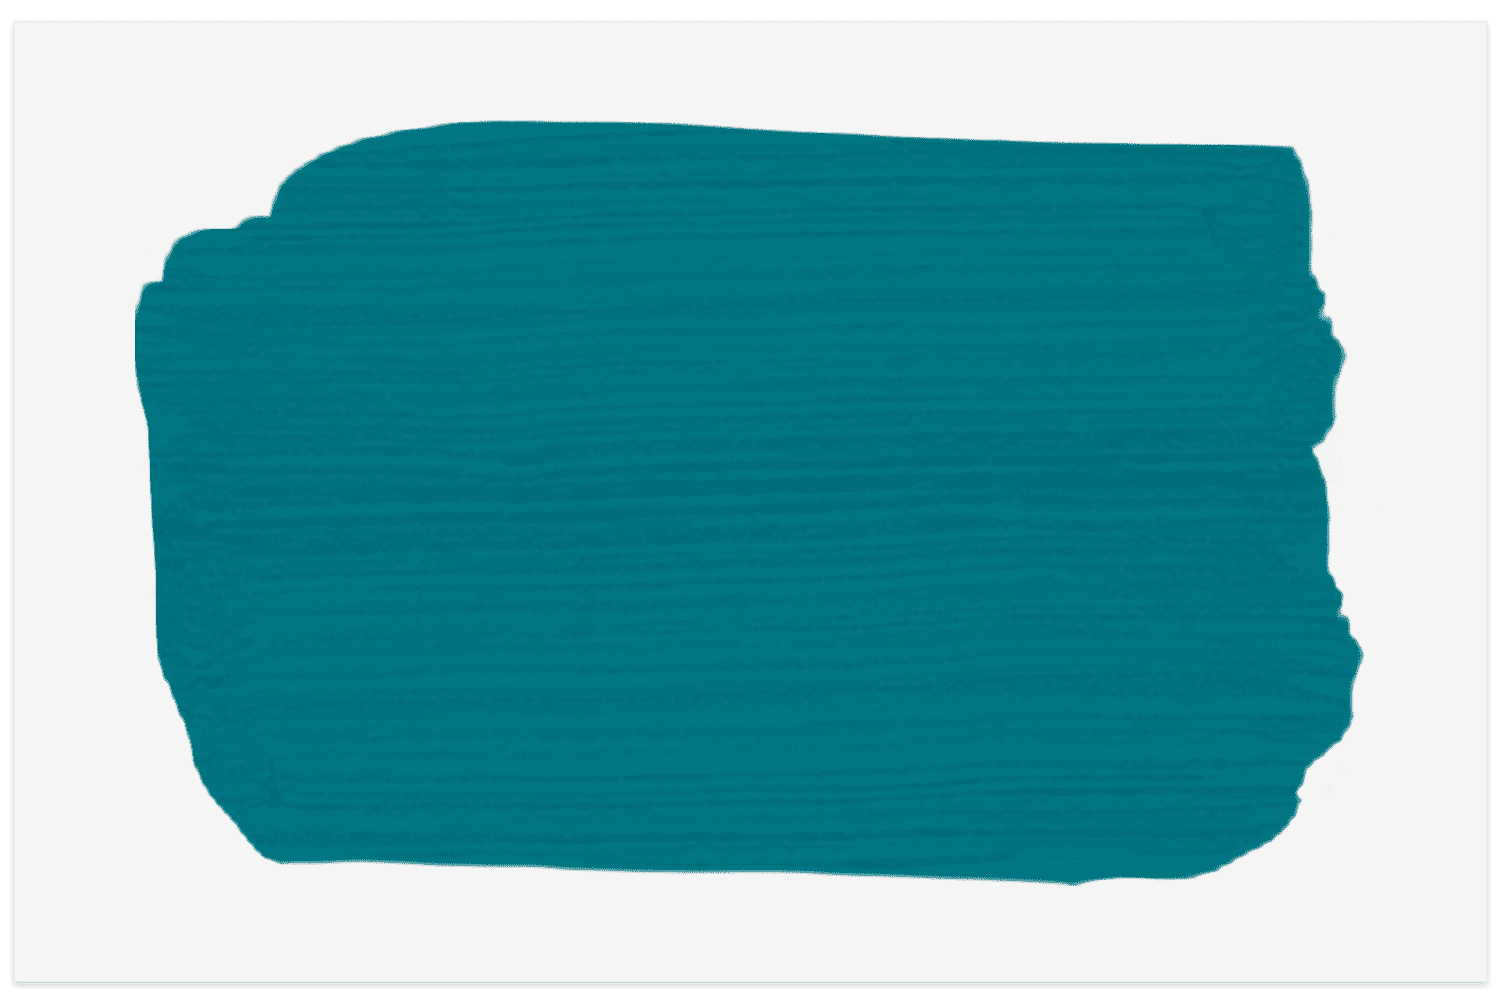 Behr The Real Teal swatch